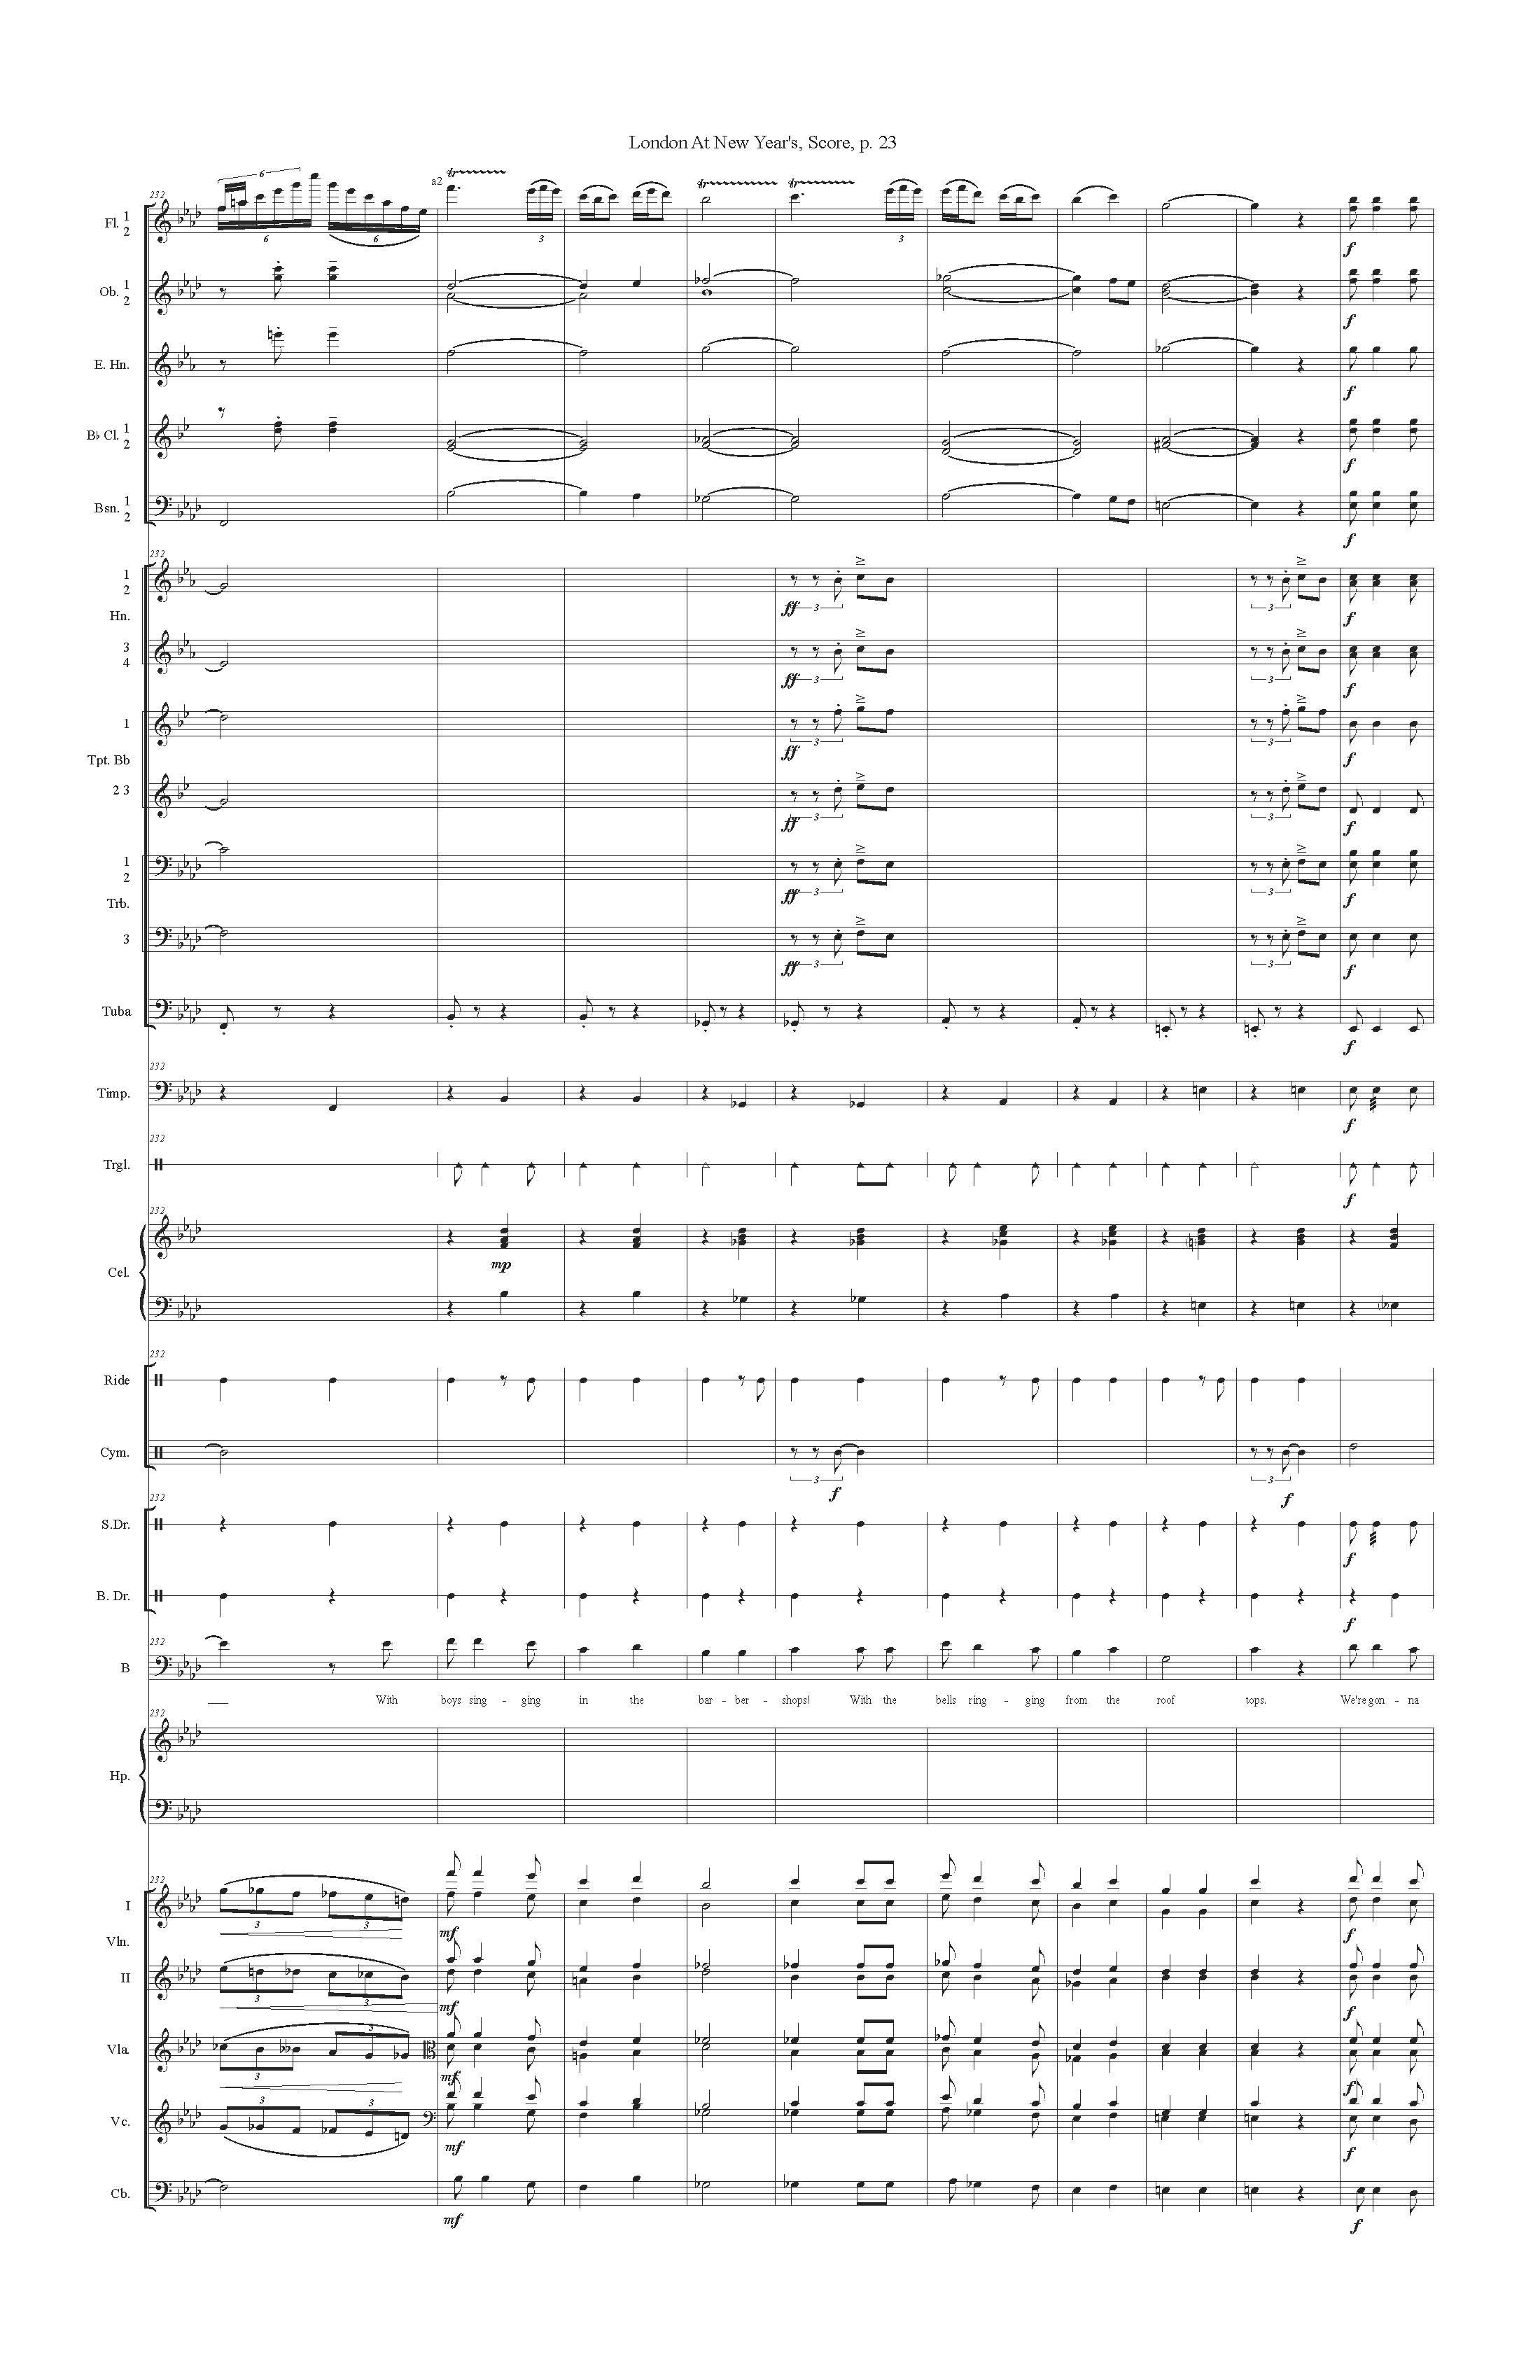 LONDON AT NEW YEARS ORCH - Score_Page_23.jpg